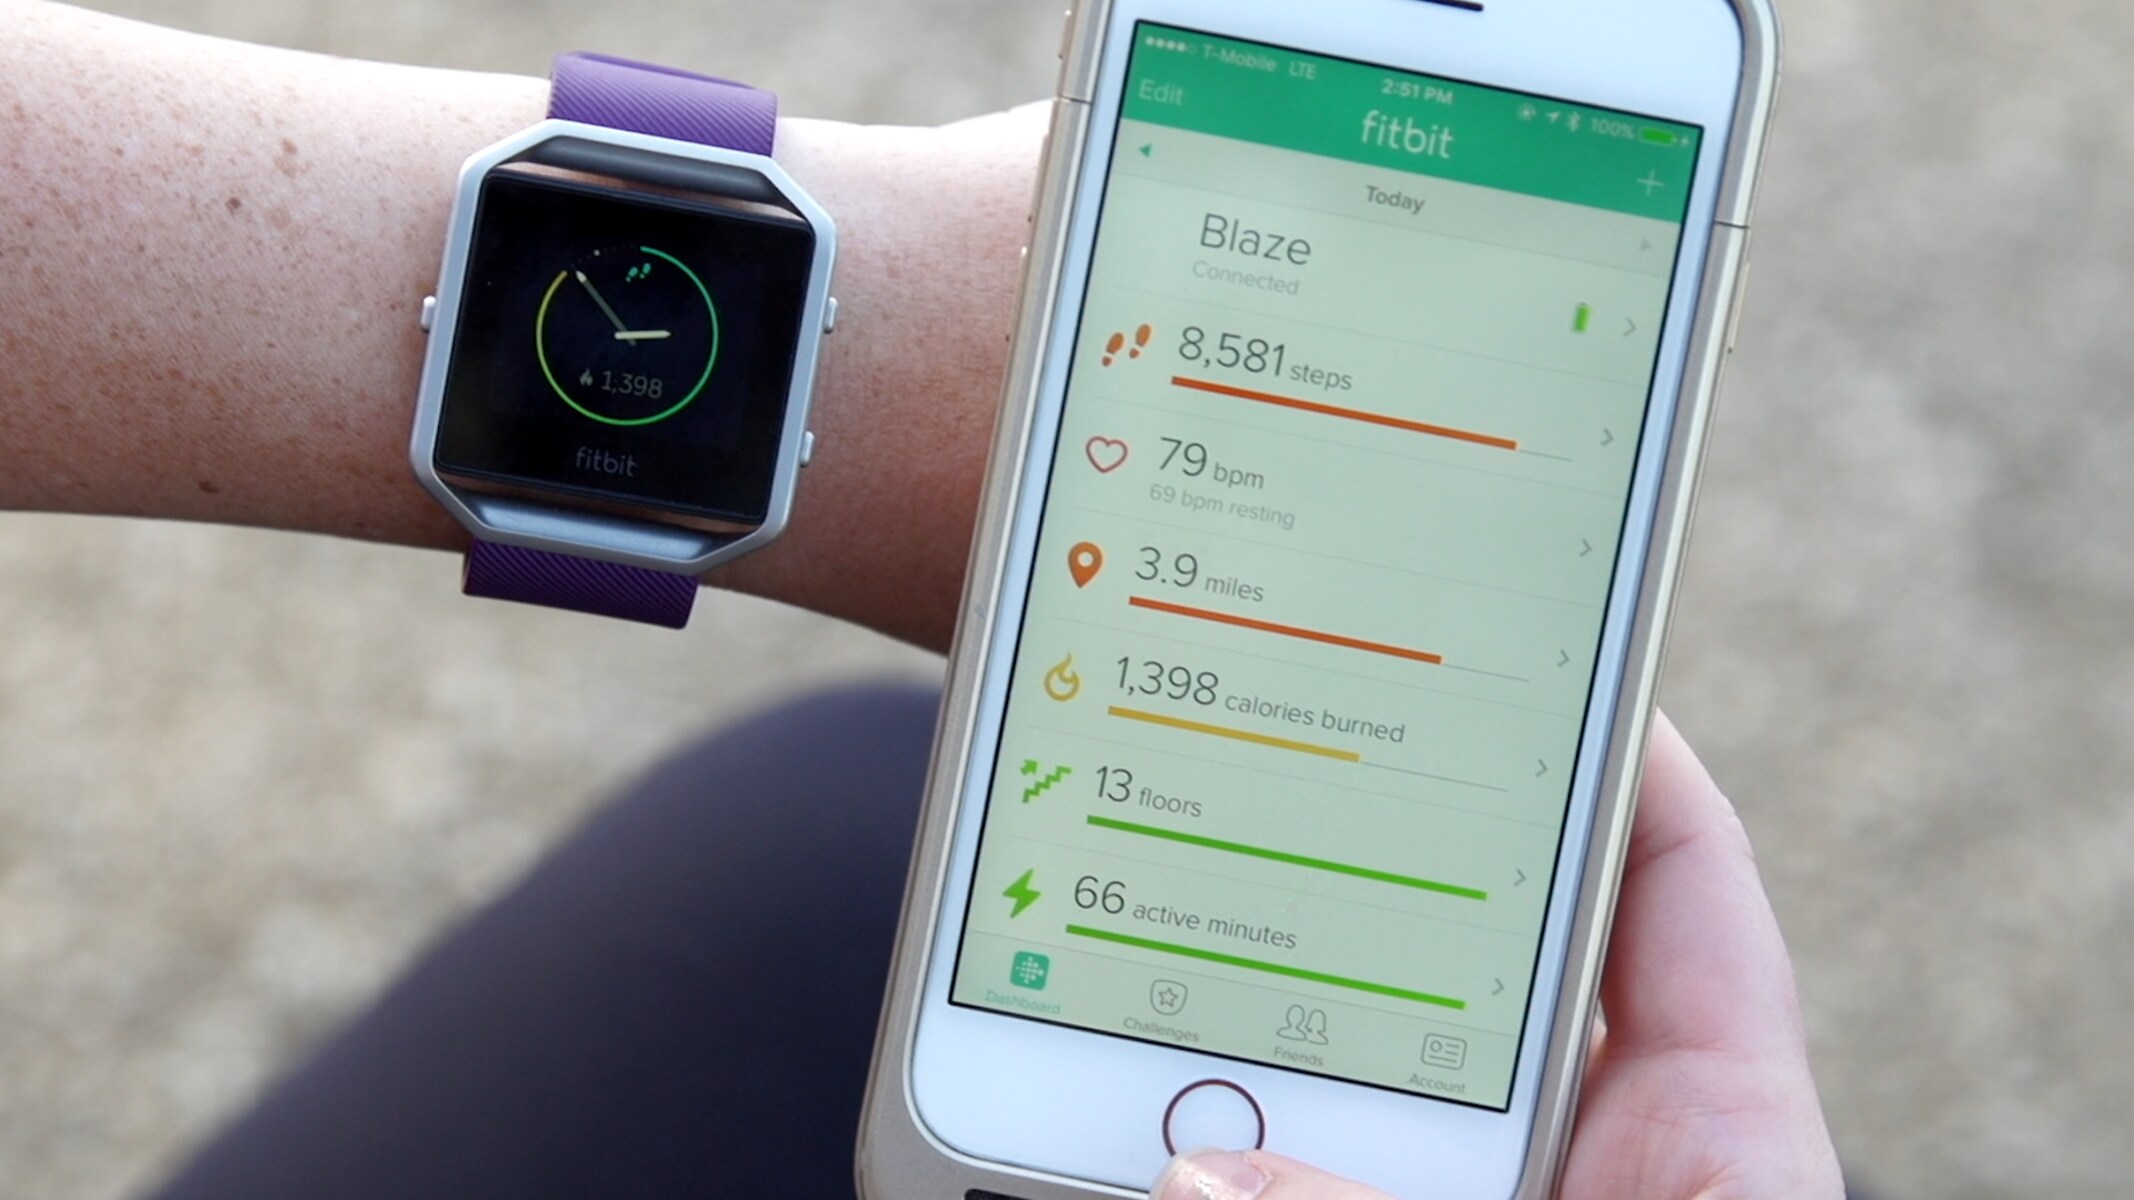 Blaze Connection: Pairing Your Fitbit Blaze To Your Phone